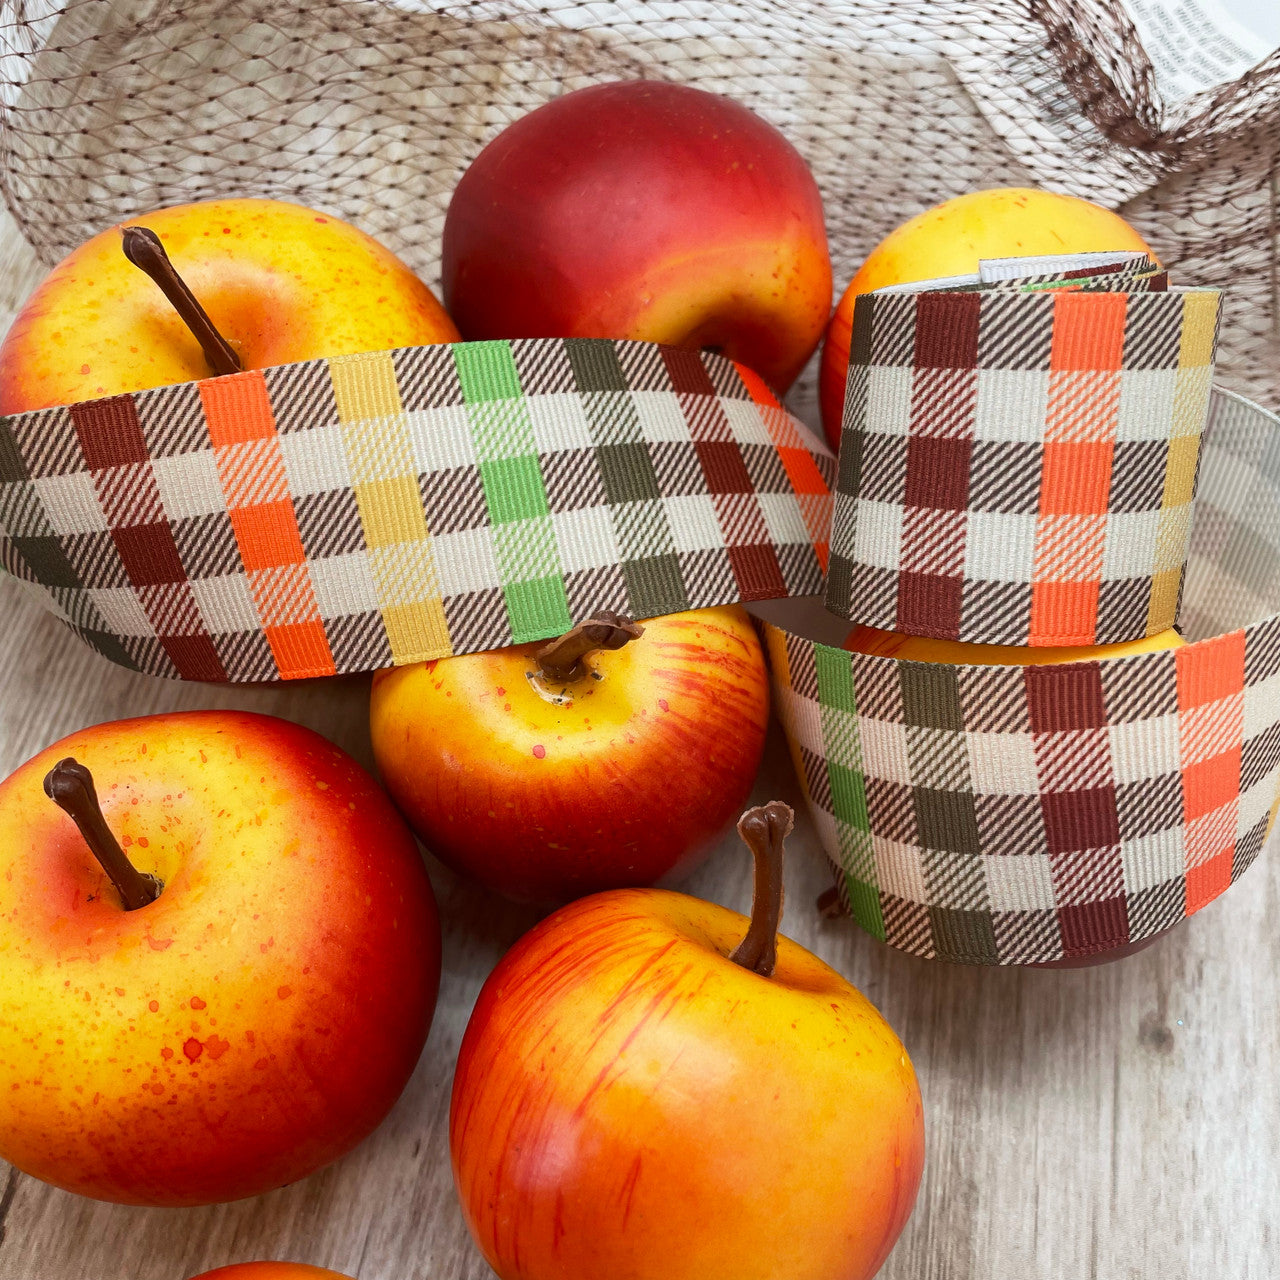 Make your bounty of apples extra special by tying a basket with our plaid ribbon and gifting to a friend!